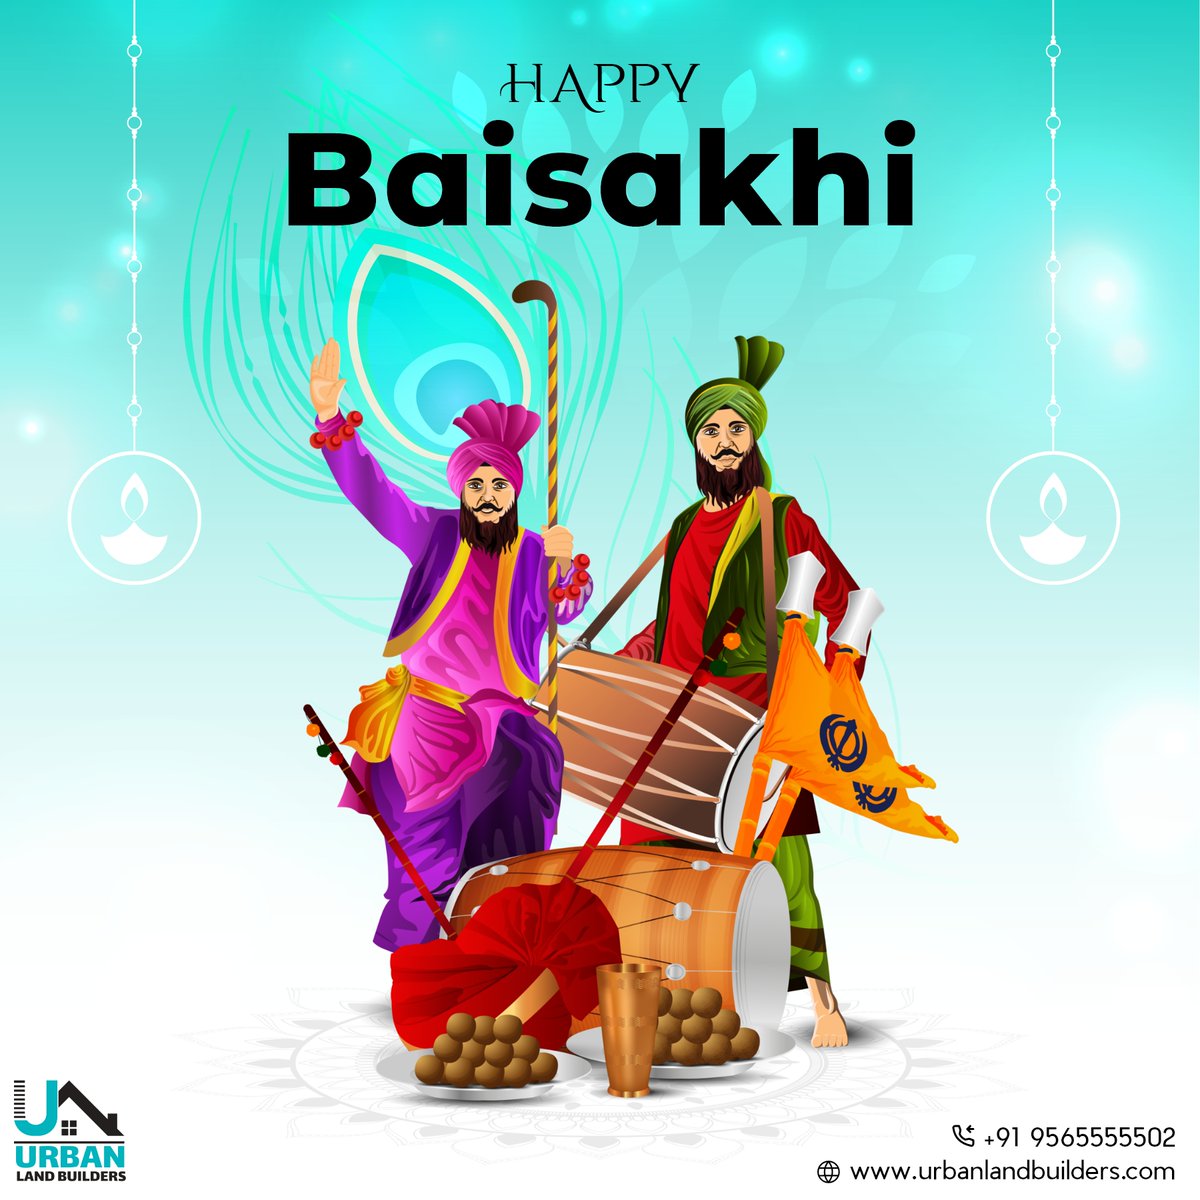 Urban Land Builders wishes you all a very happy #Baisakhi and a spring season filled with new opportunities, growth, and success!

Let us celebrate the festival of Baisakhi with enthusiasm and gratitude for the bounties of nature!

#baisakhi #urbanlandBuilders #khararproperty